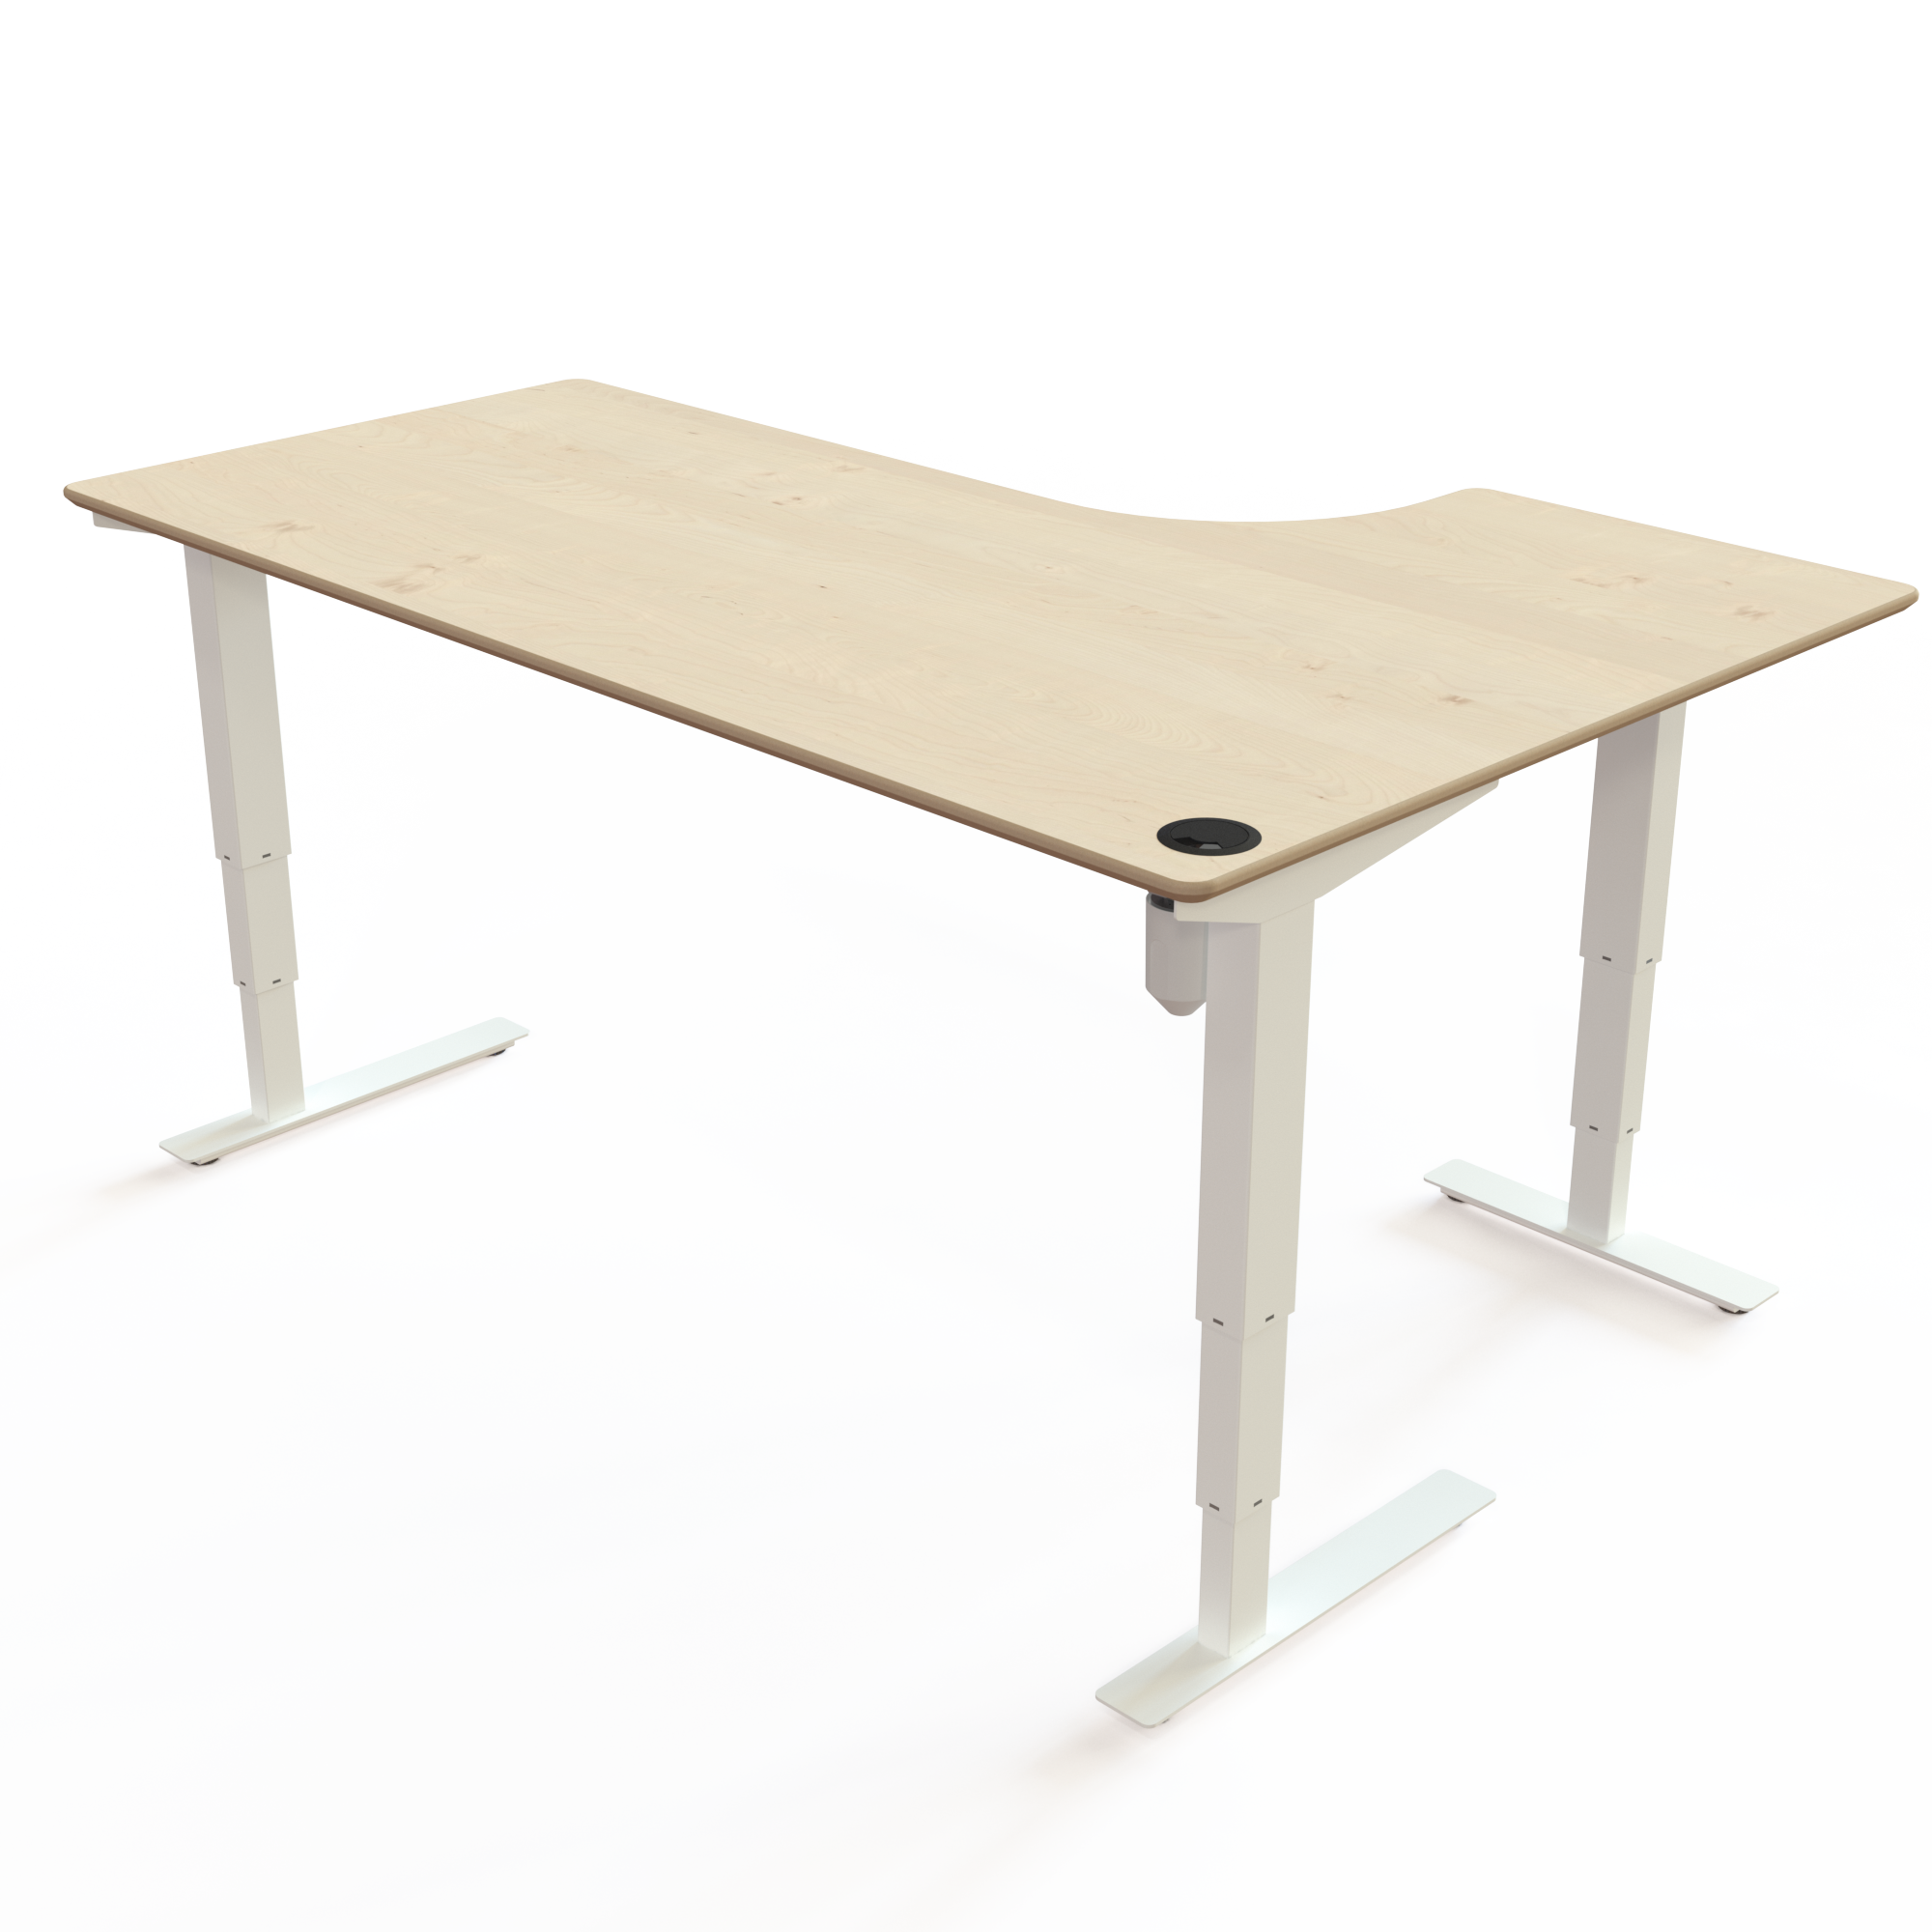 Electric Adjustable Desk | 180x120 cm | Maple with white frame